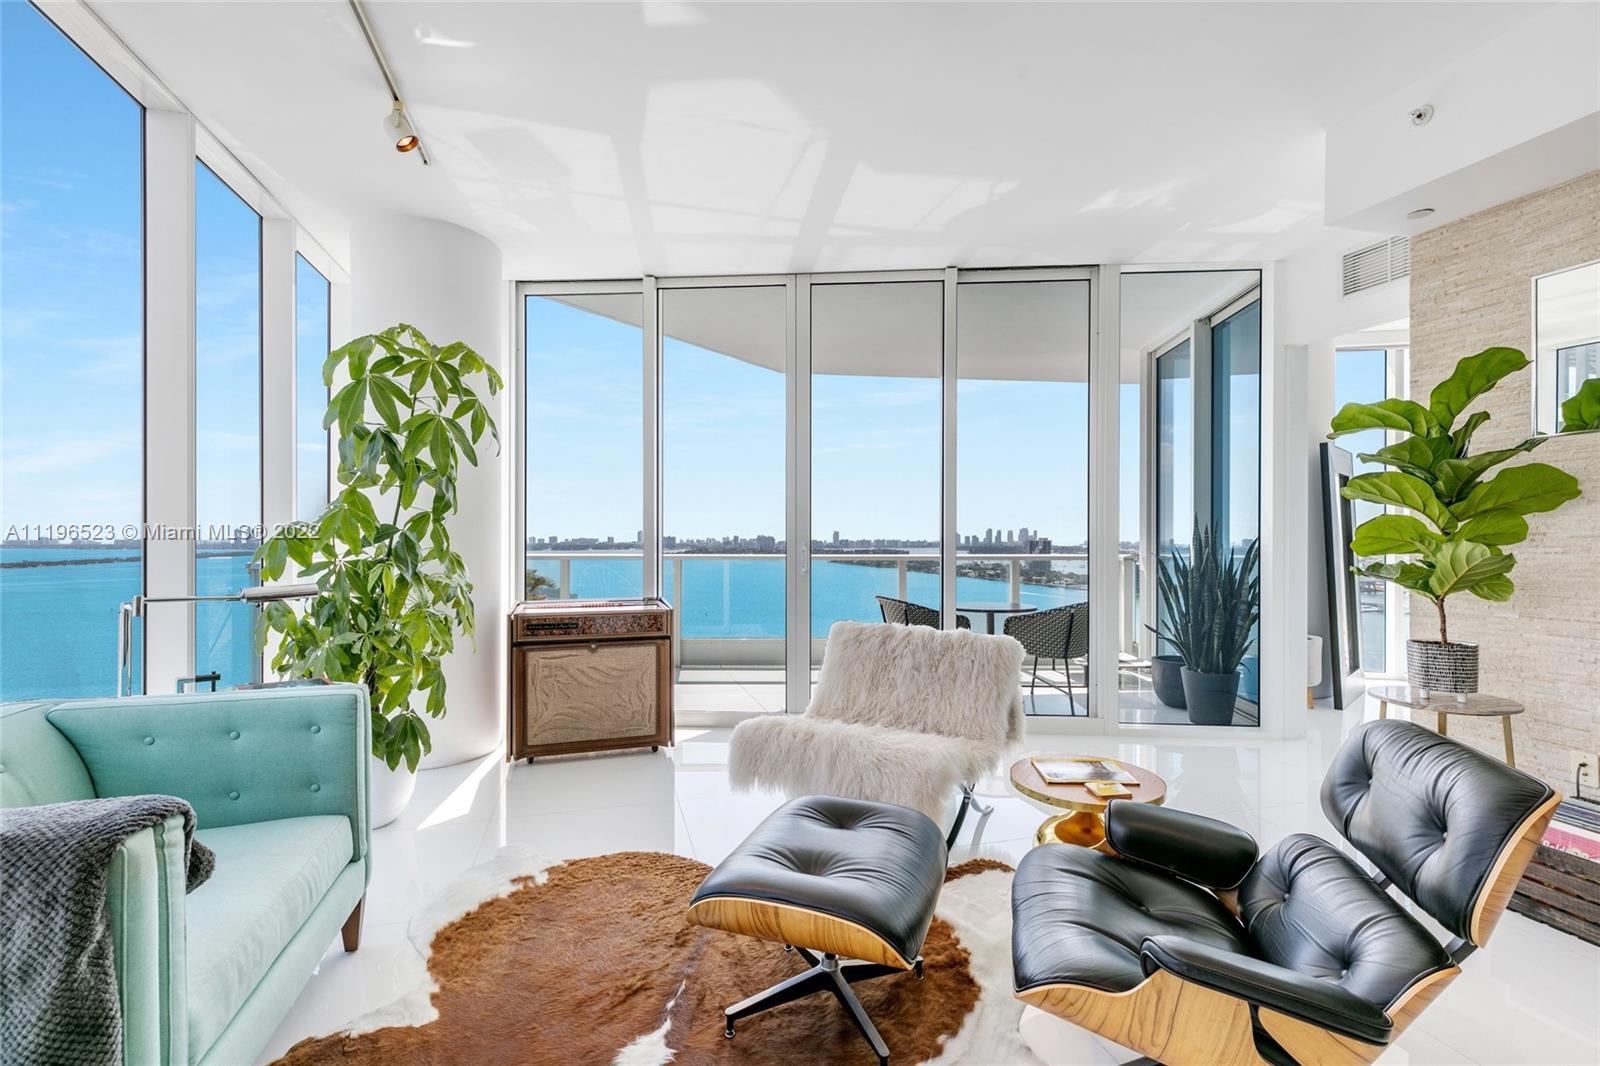 Enjoy stunning views from this gorgeous 2bed/2.5 bath residence at Paramount Bay. Northeast corner f